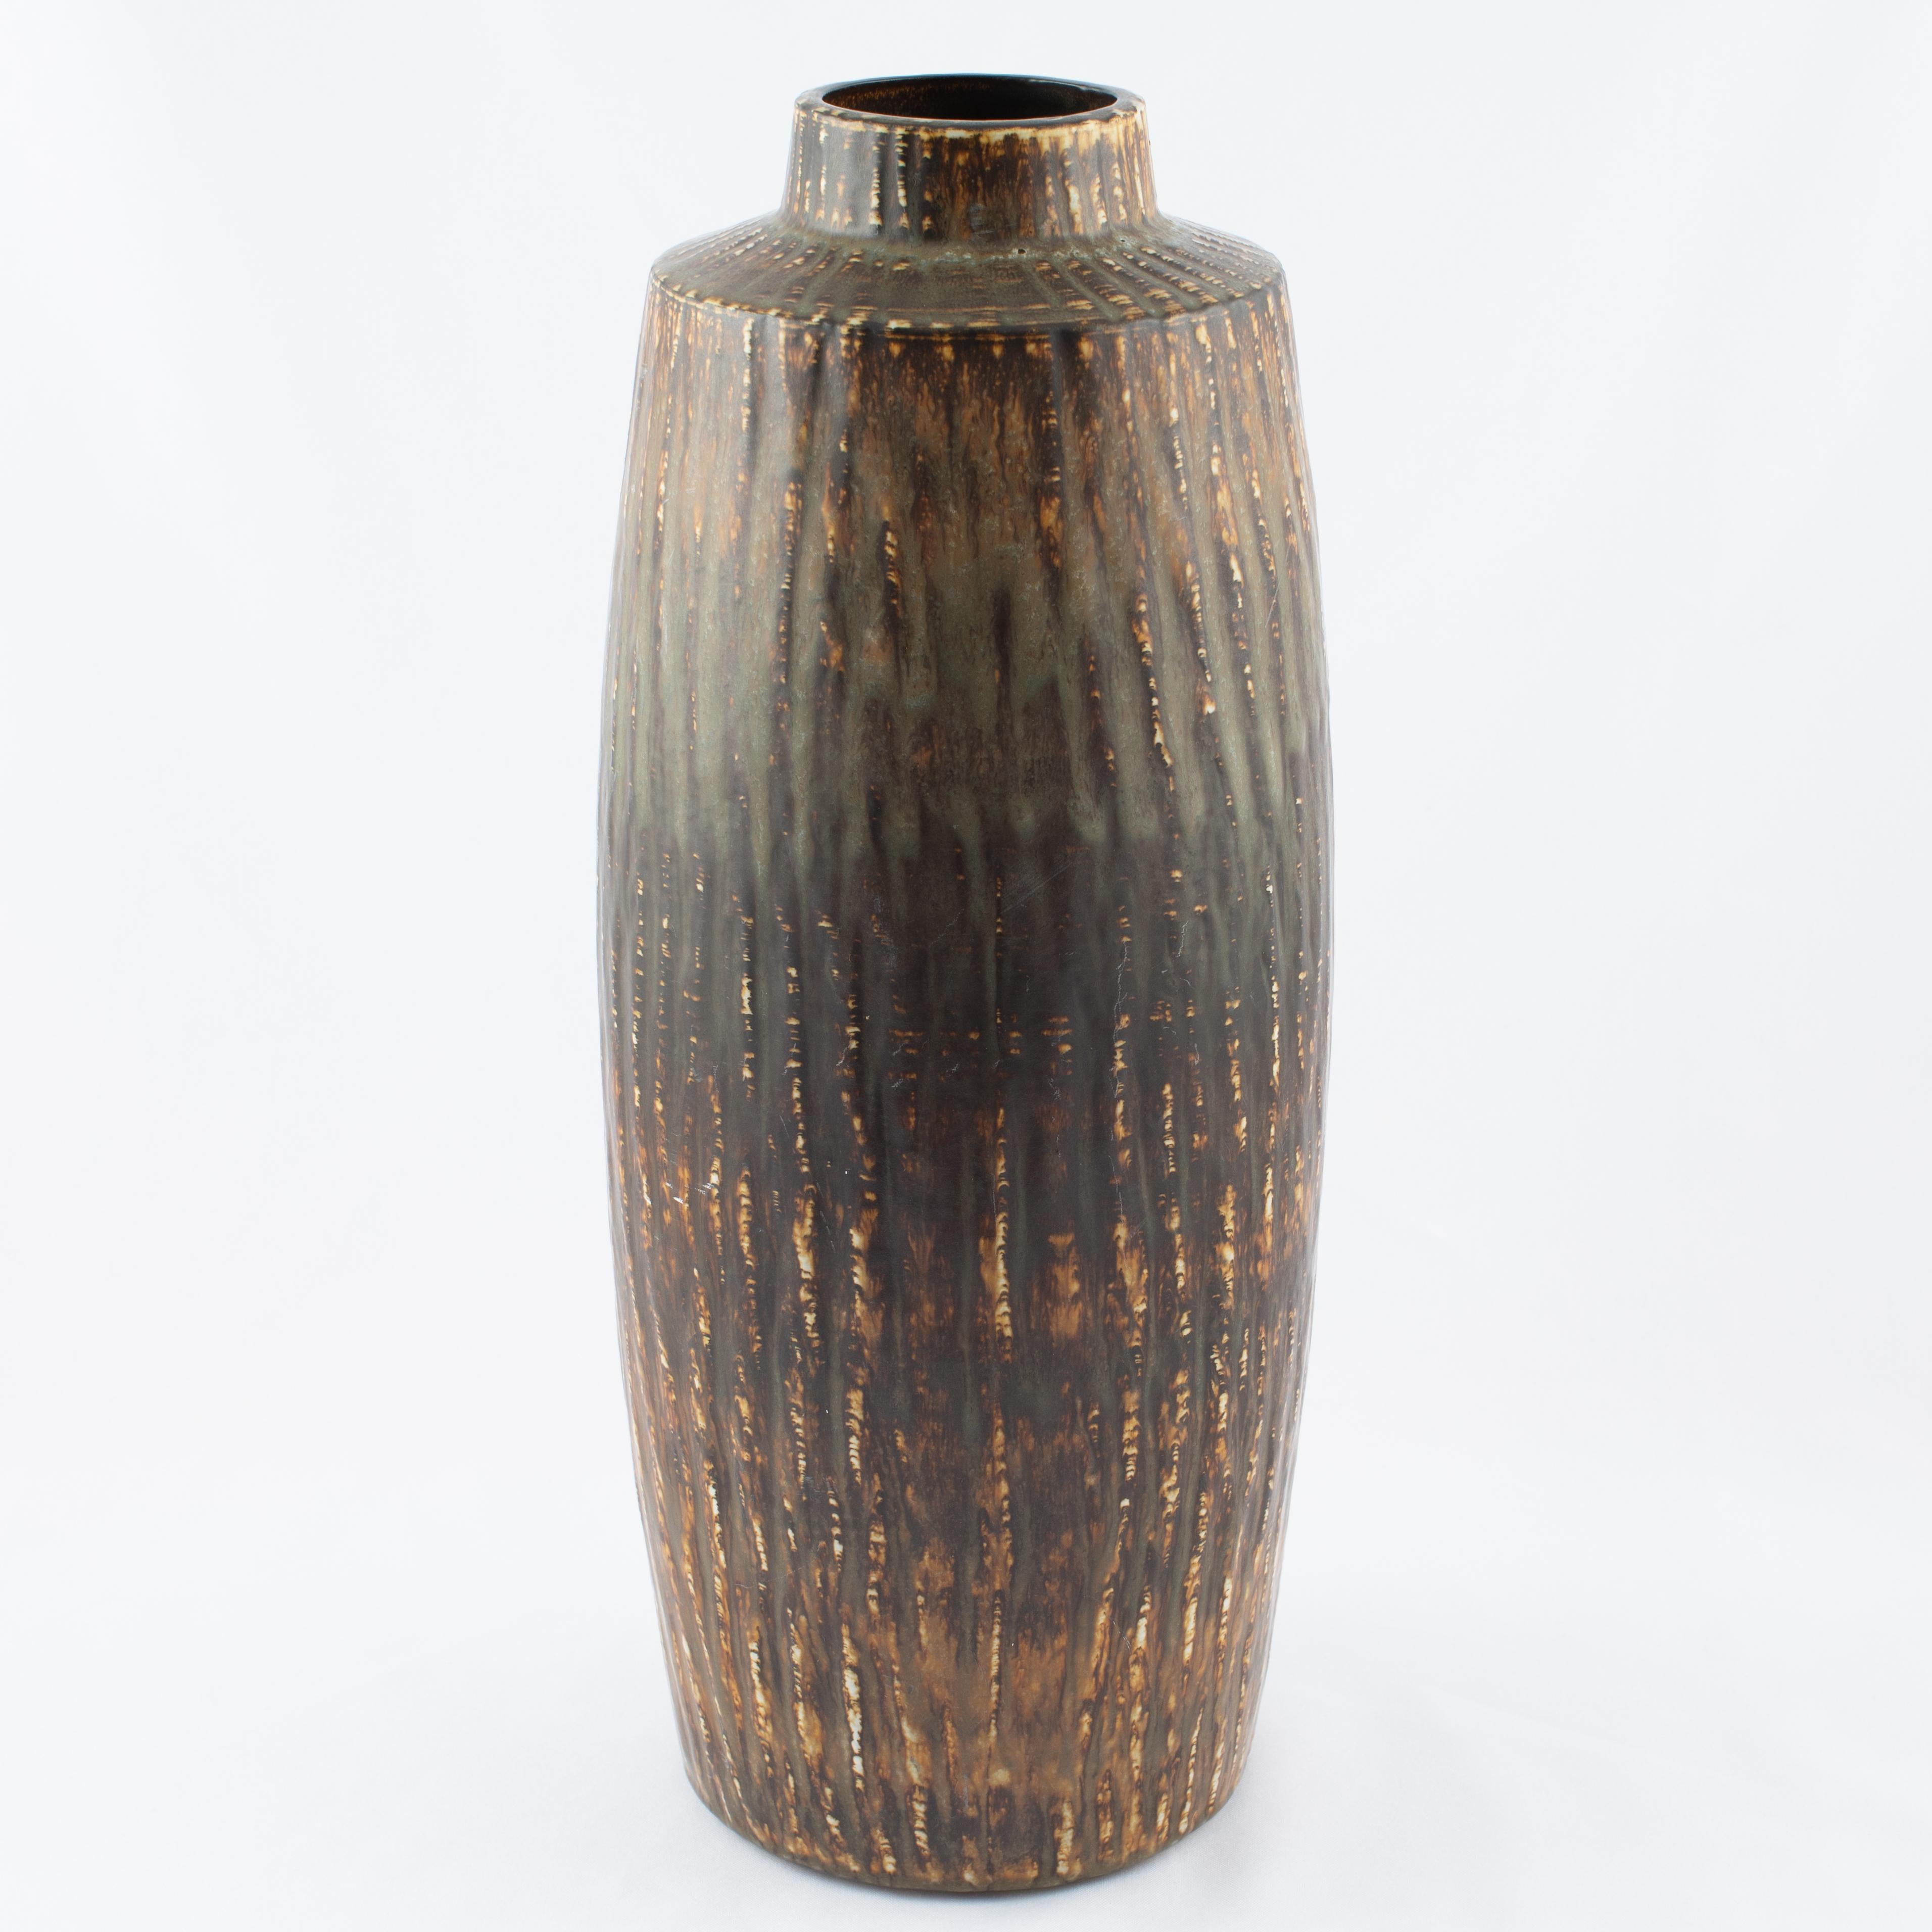 Monumental Gunnar Nylund cylindrical stoneware floor vase with mottled brown and green 